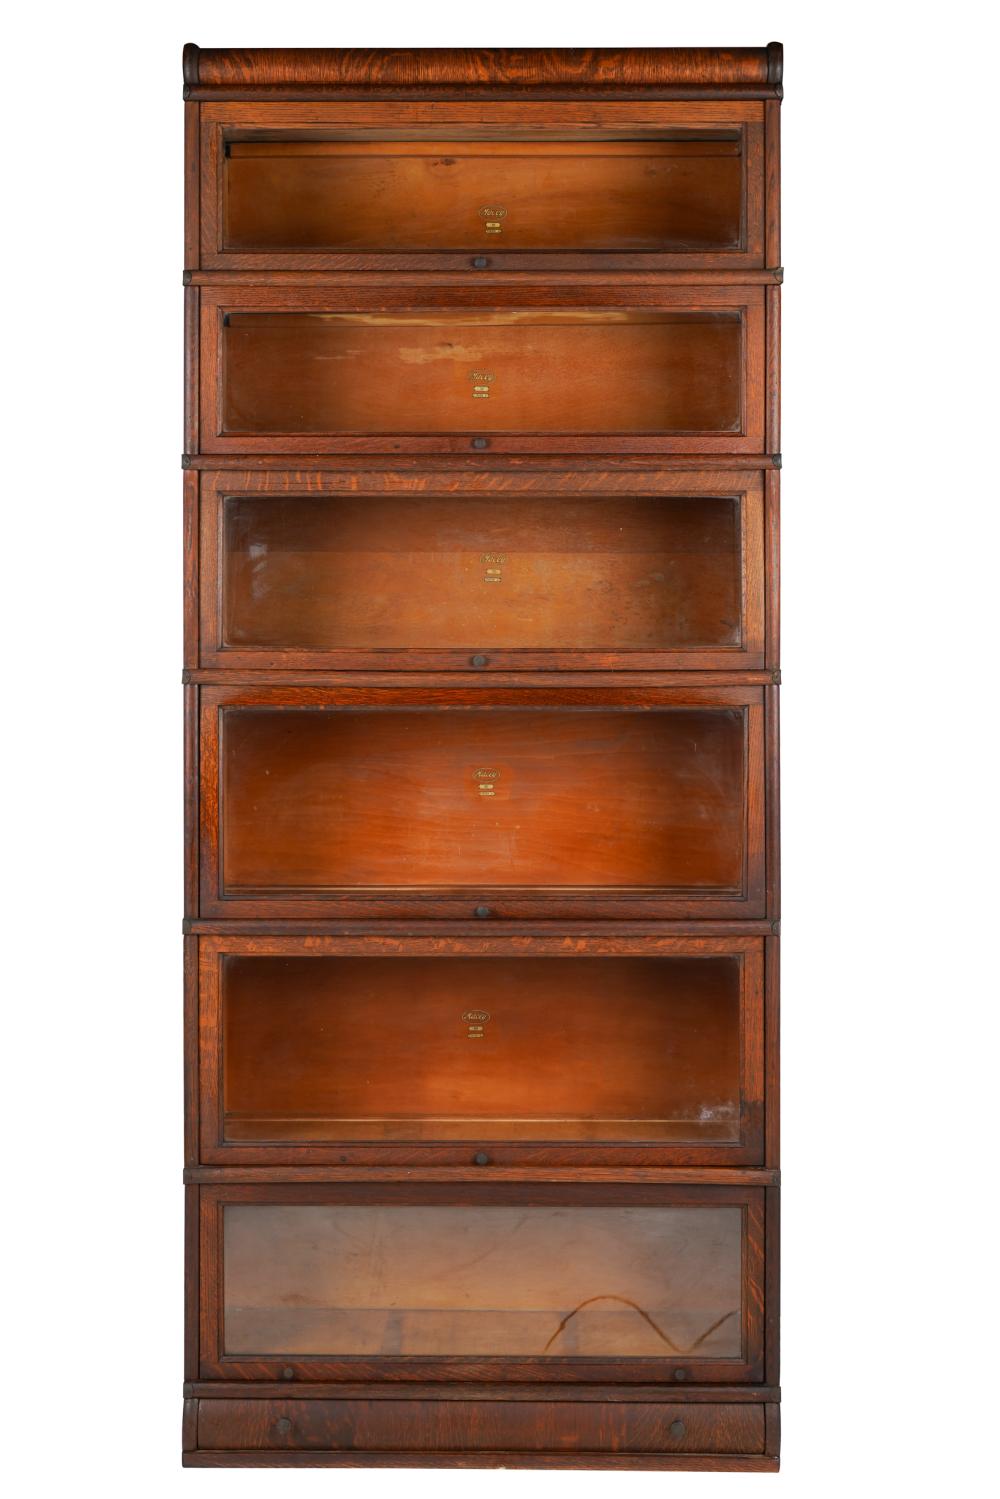 MACEY SIX-SECTION OAK LAWYERS BOOKCASEwith